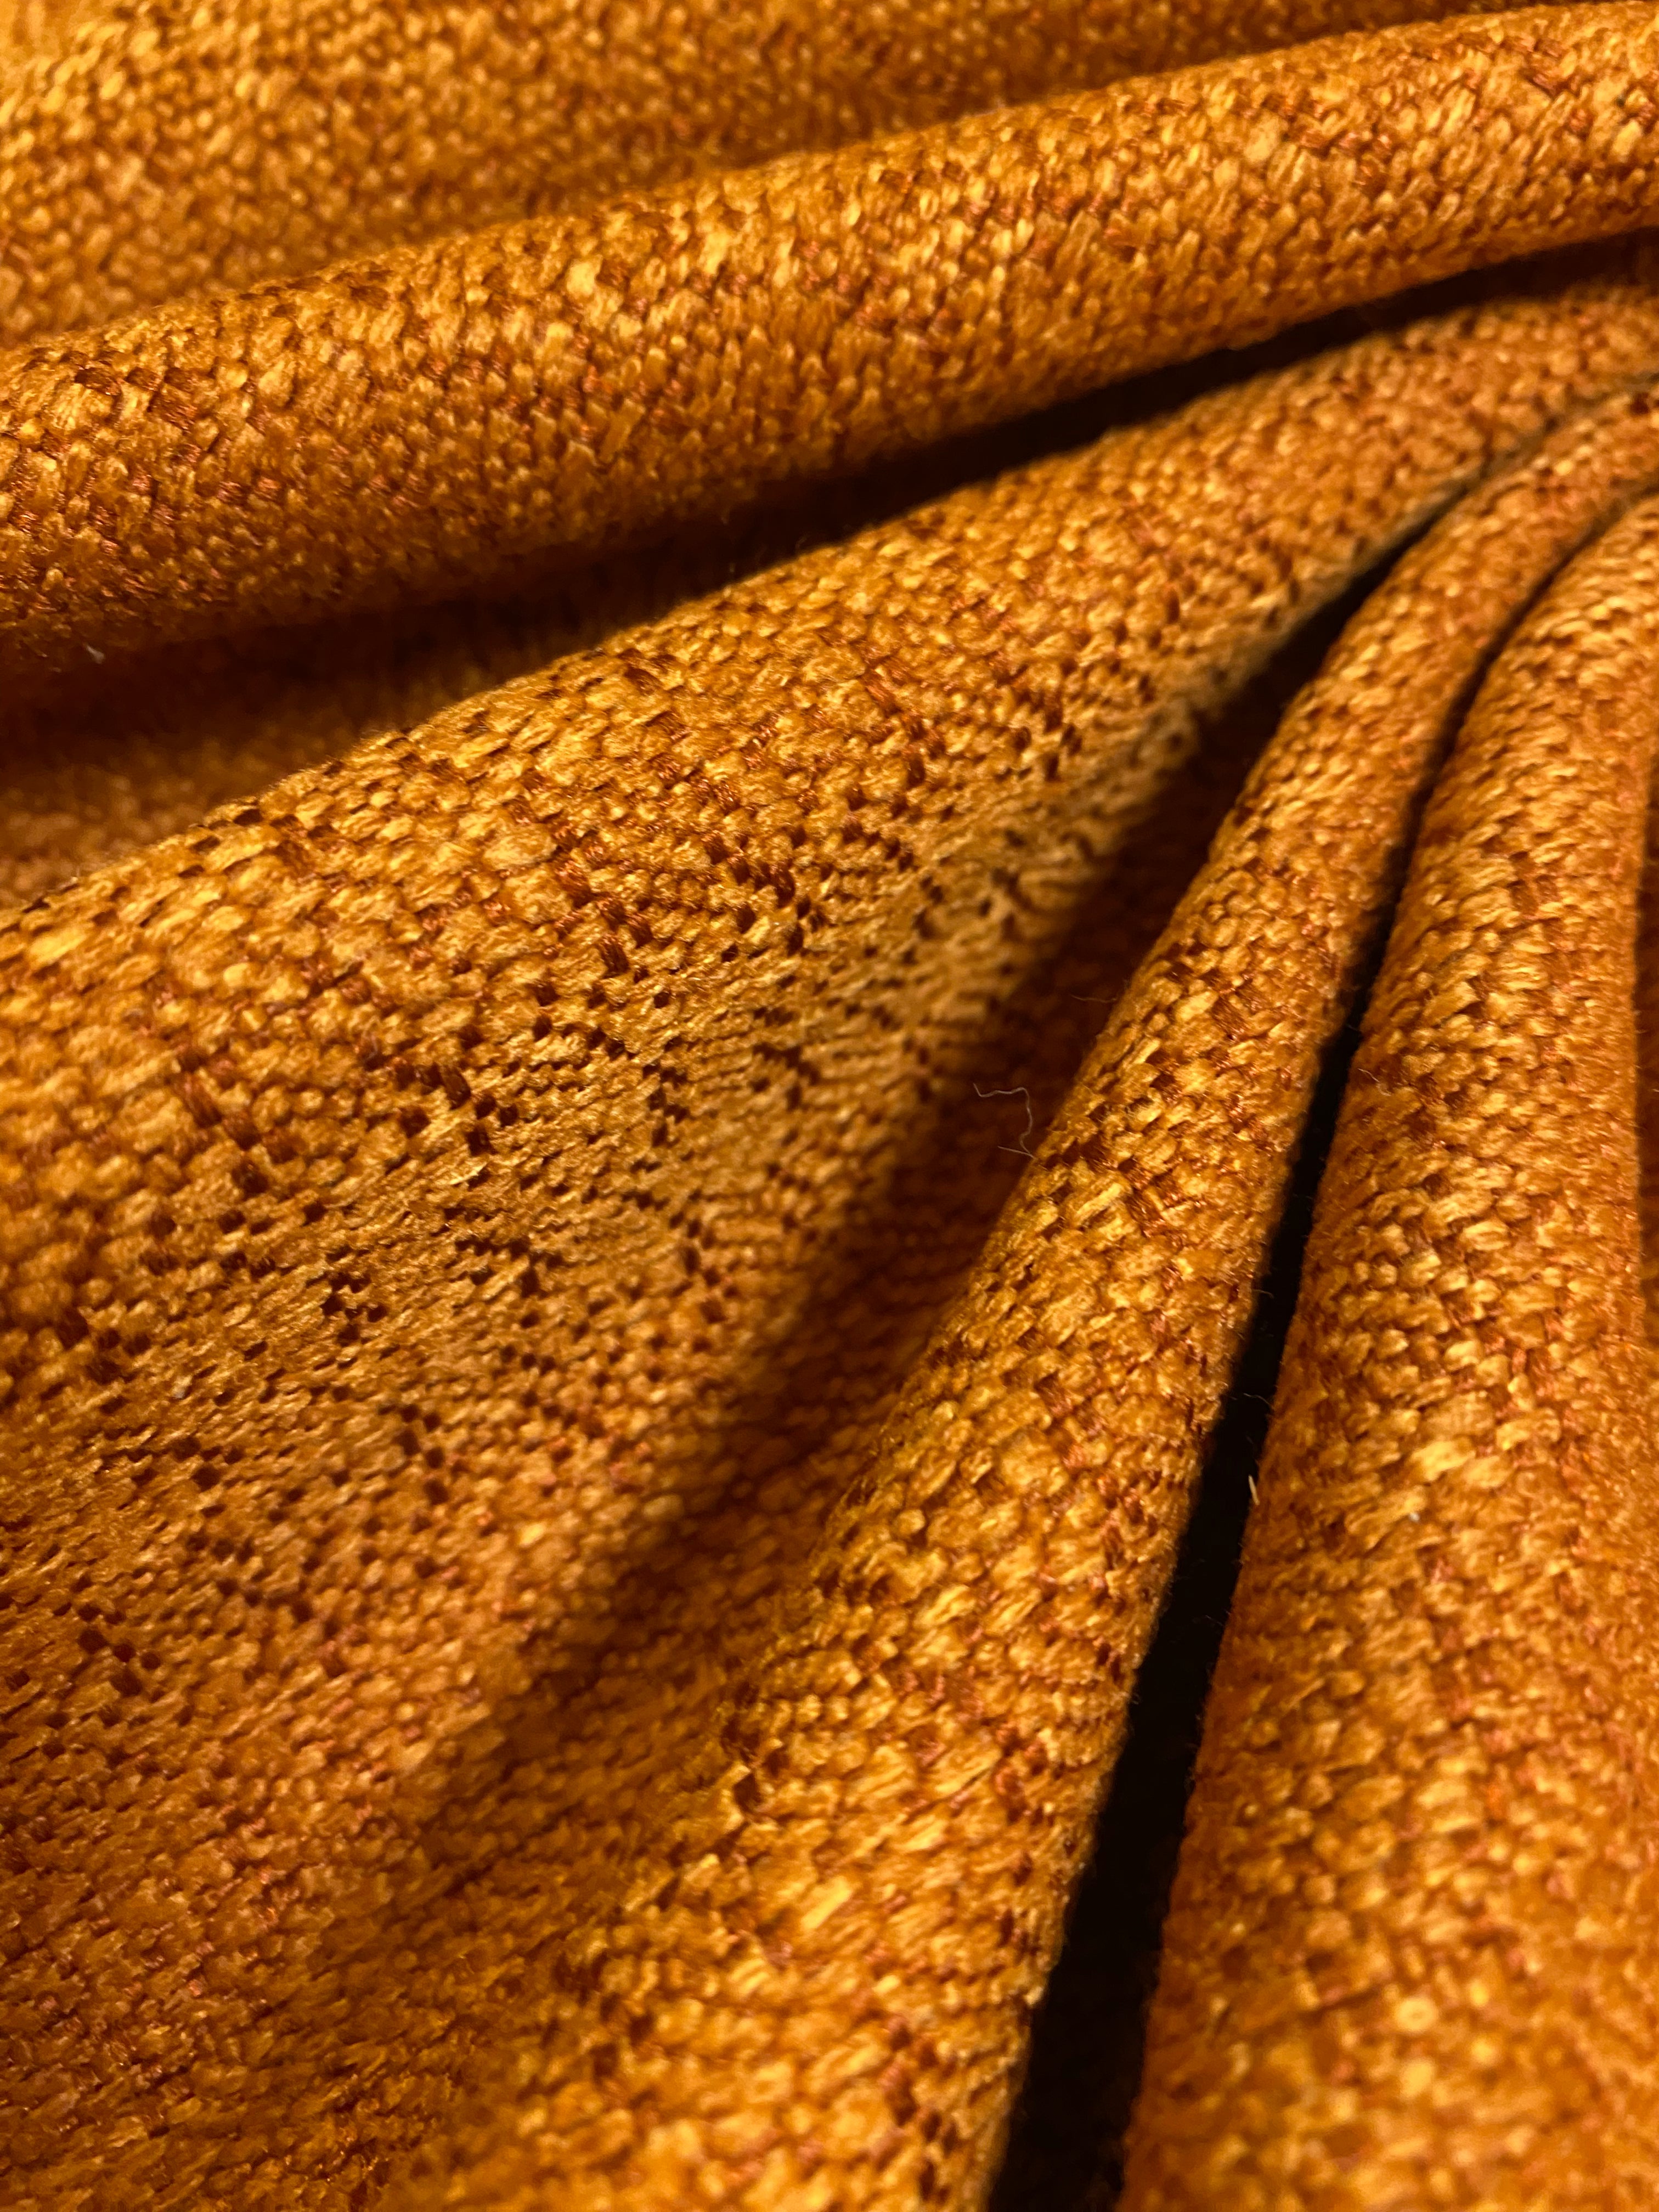 Shop for All Spice Sisal Tweed Upholstery Fabric